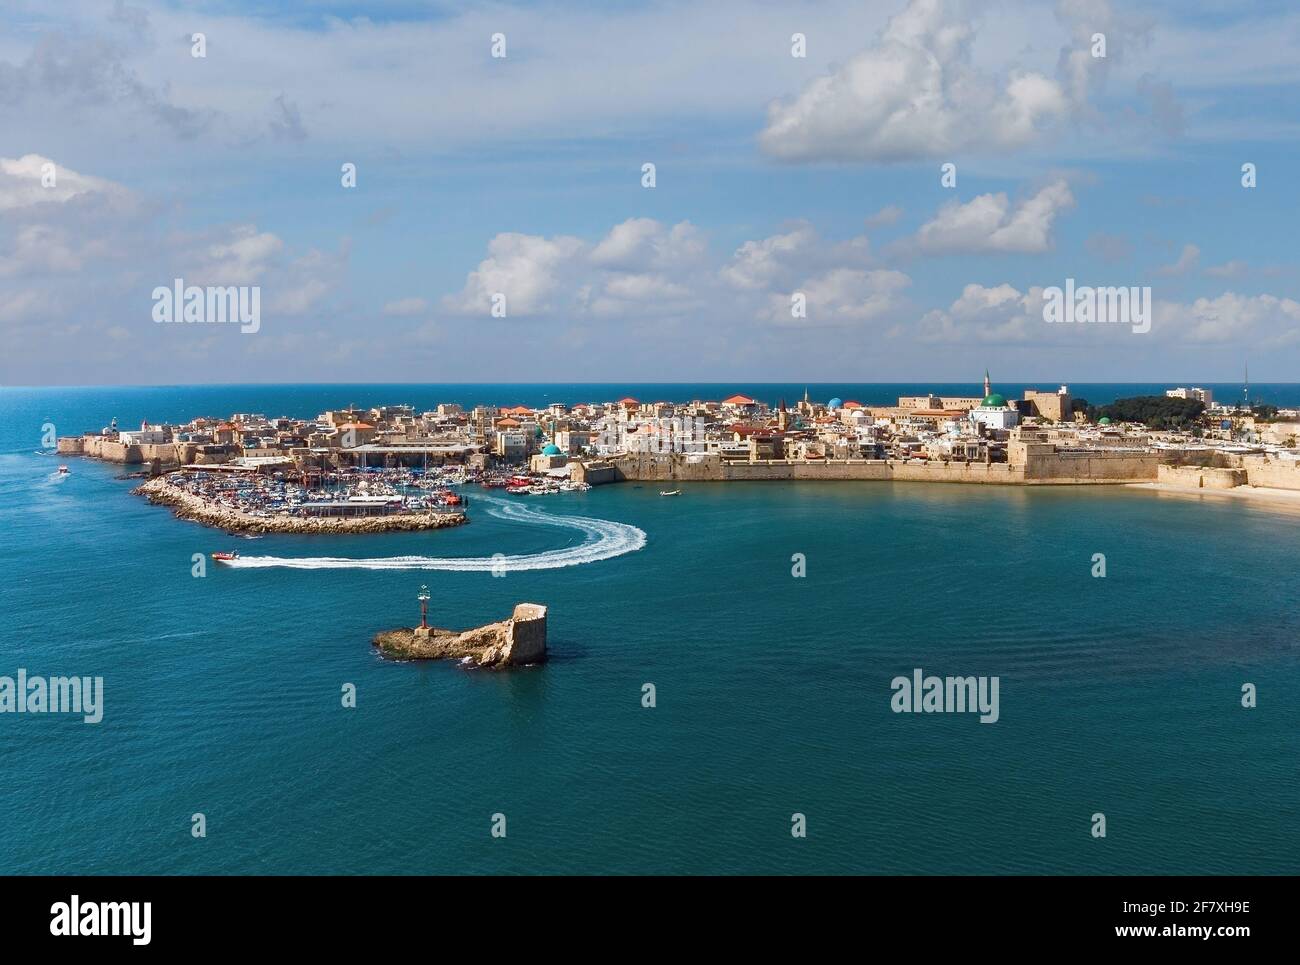 Boats off the coast of the ancient city of Akko aerial photography Stock Photo